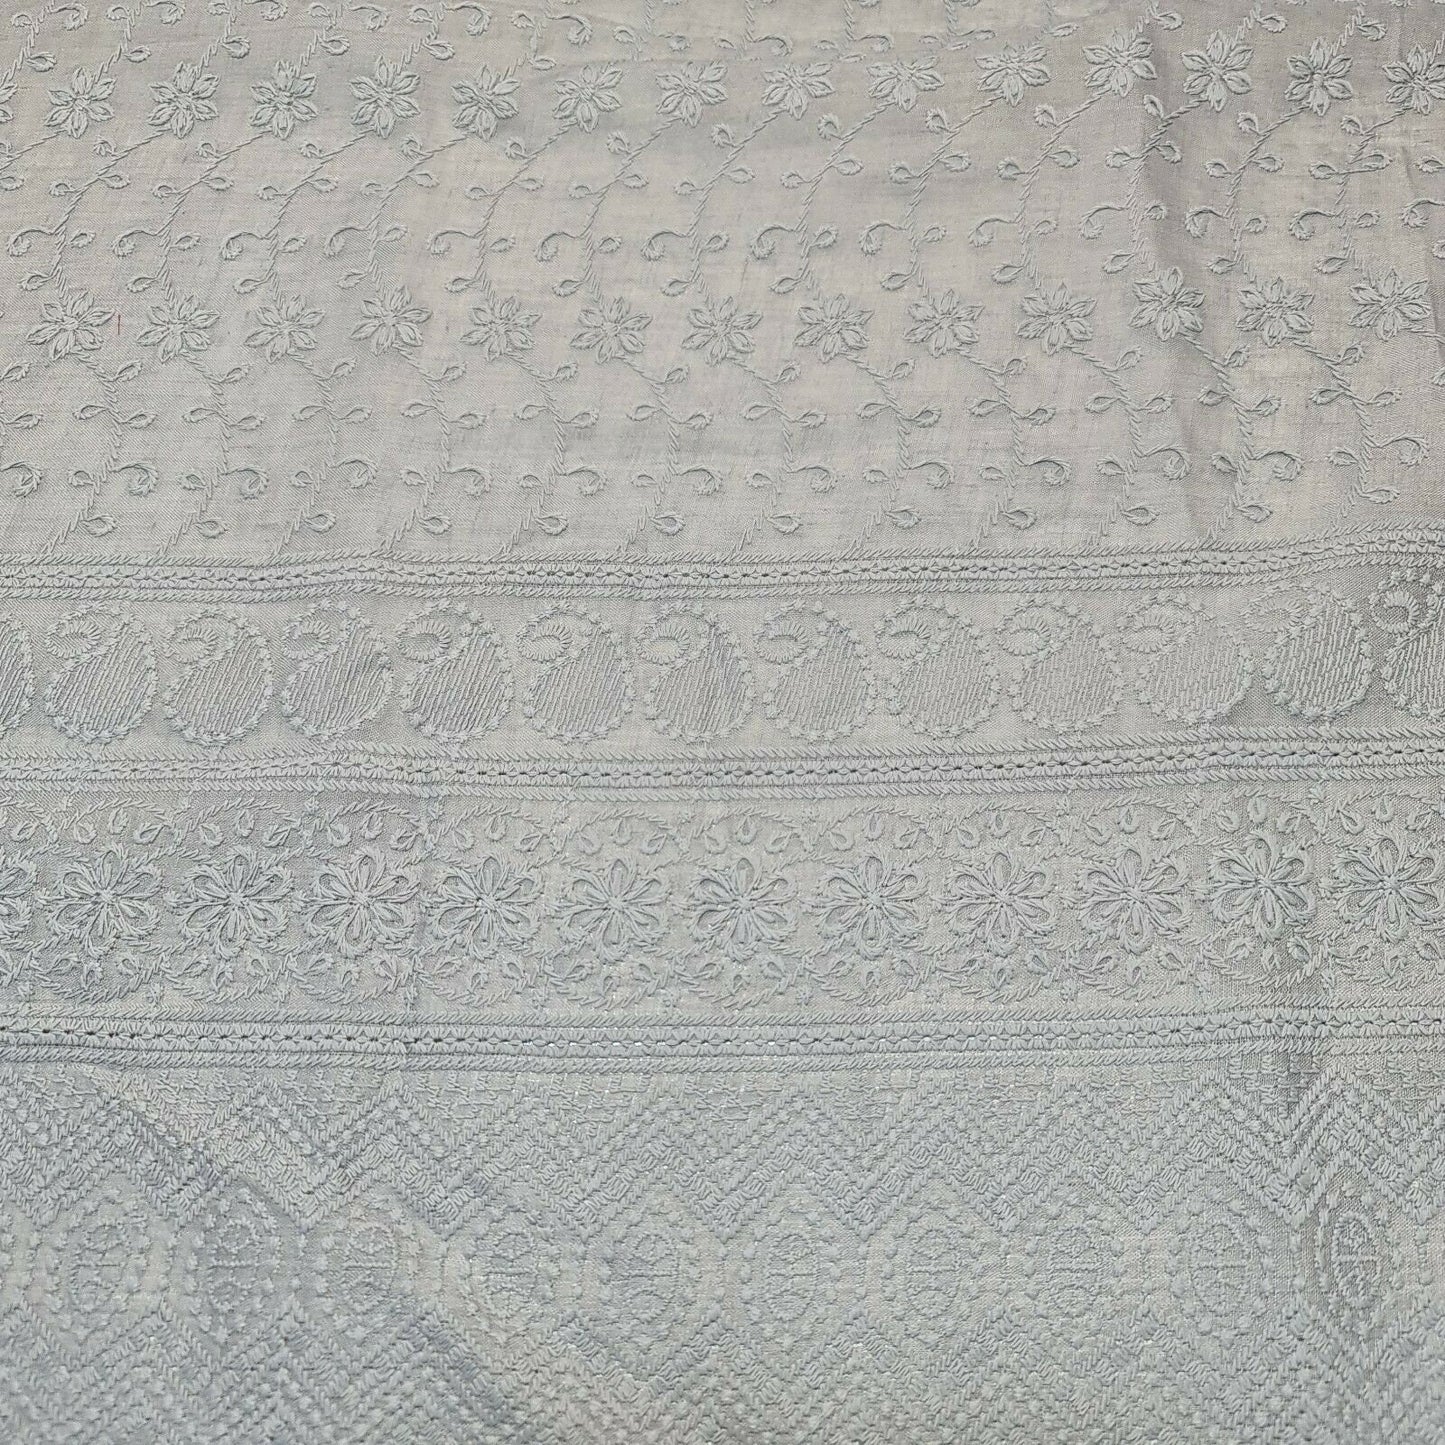 NEW SPRING 100% Cotton Lawn Broderie Anglaise Embroidery Dress Craft Fabric 44" (Silver Grey)